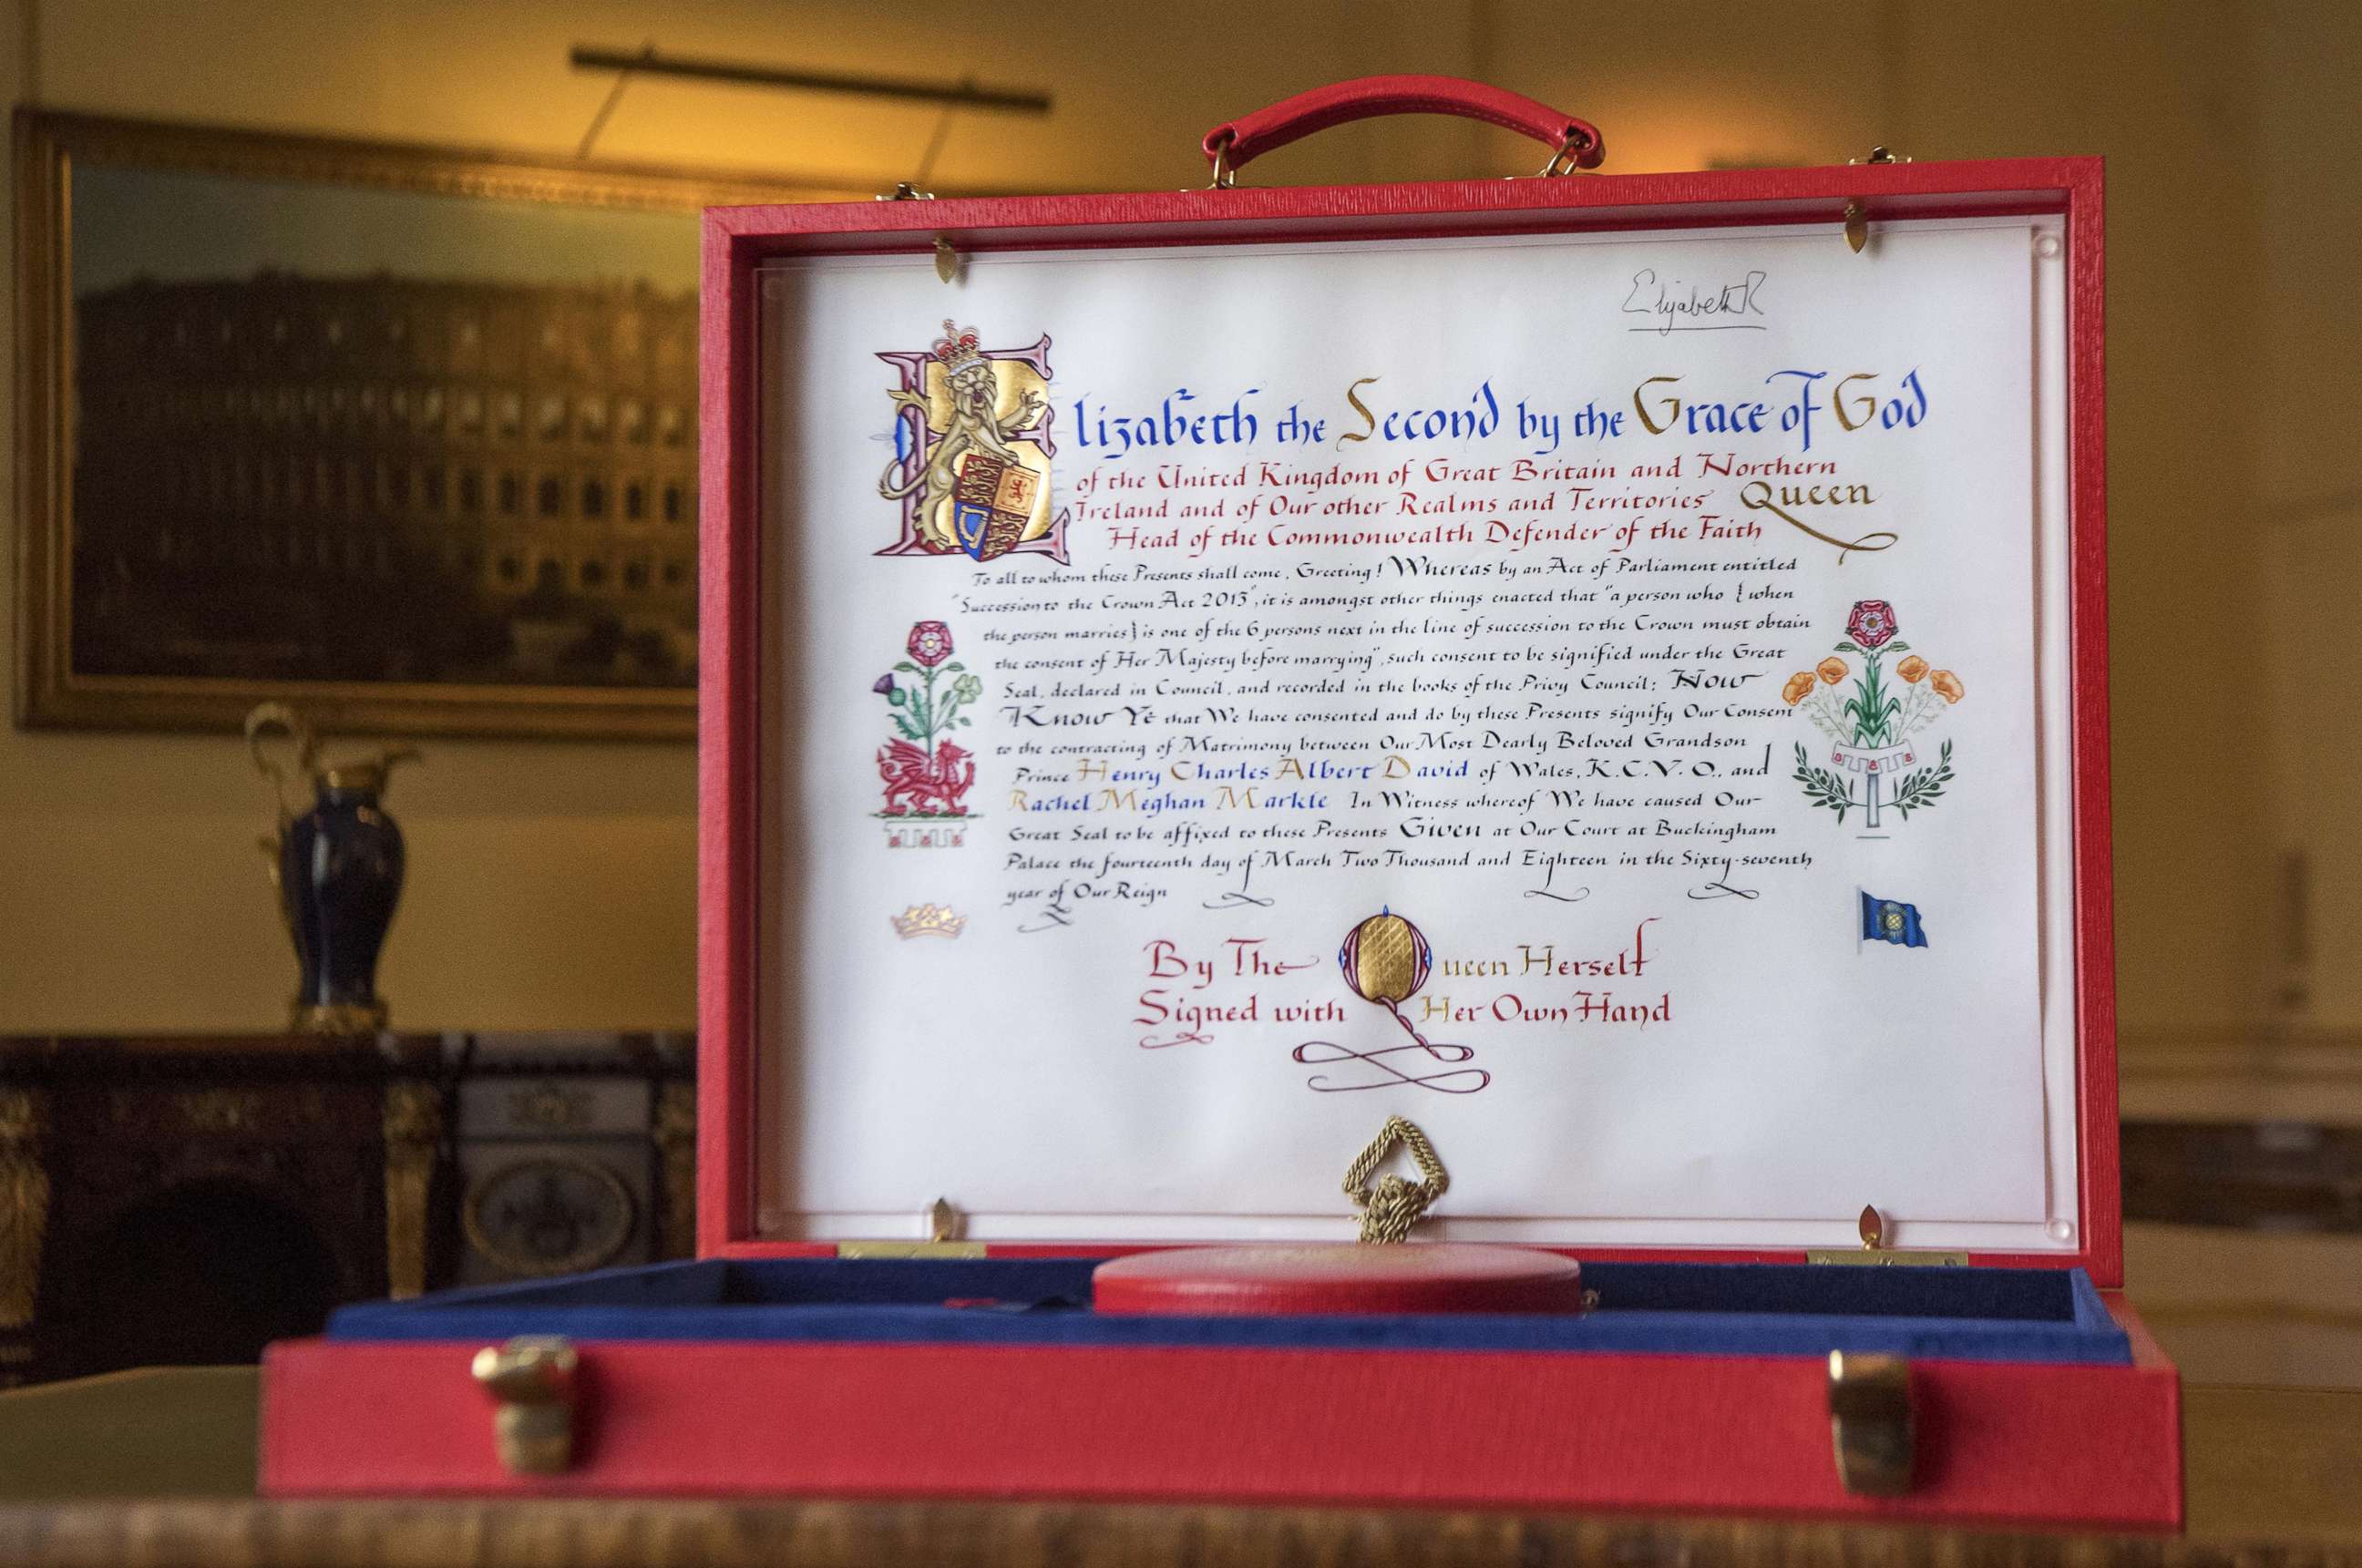 PHOTO: The 'Instrument of Consent,' which is the Queen's historic formal consent to Prince Harry's forthcoming marriage to Meghan Markle, is photographed at Buckingham Palace on May 11, 2018 in London.